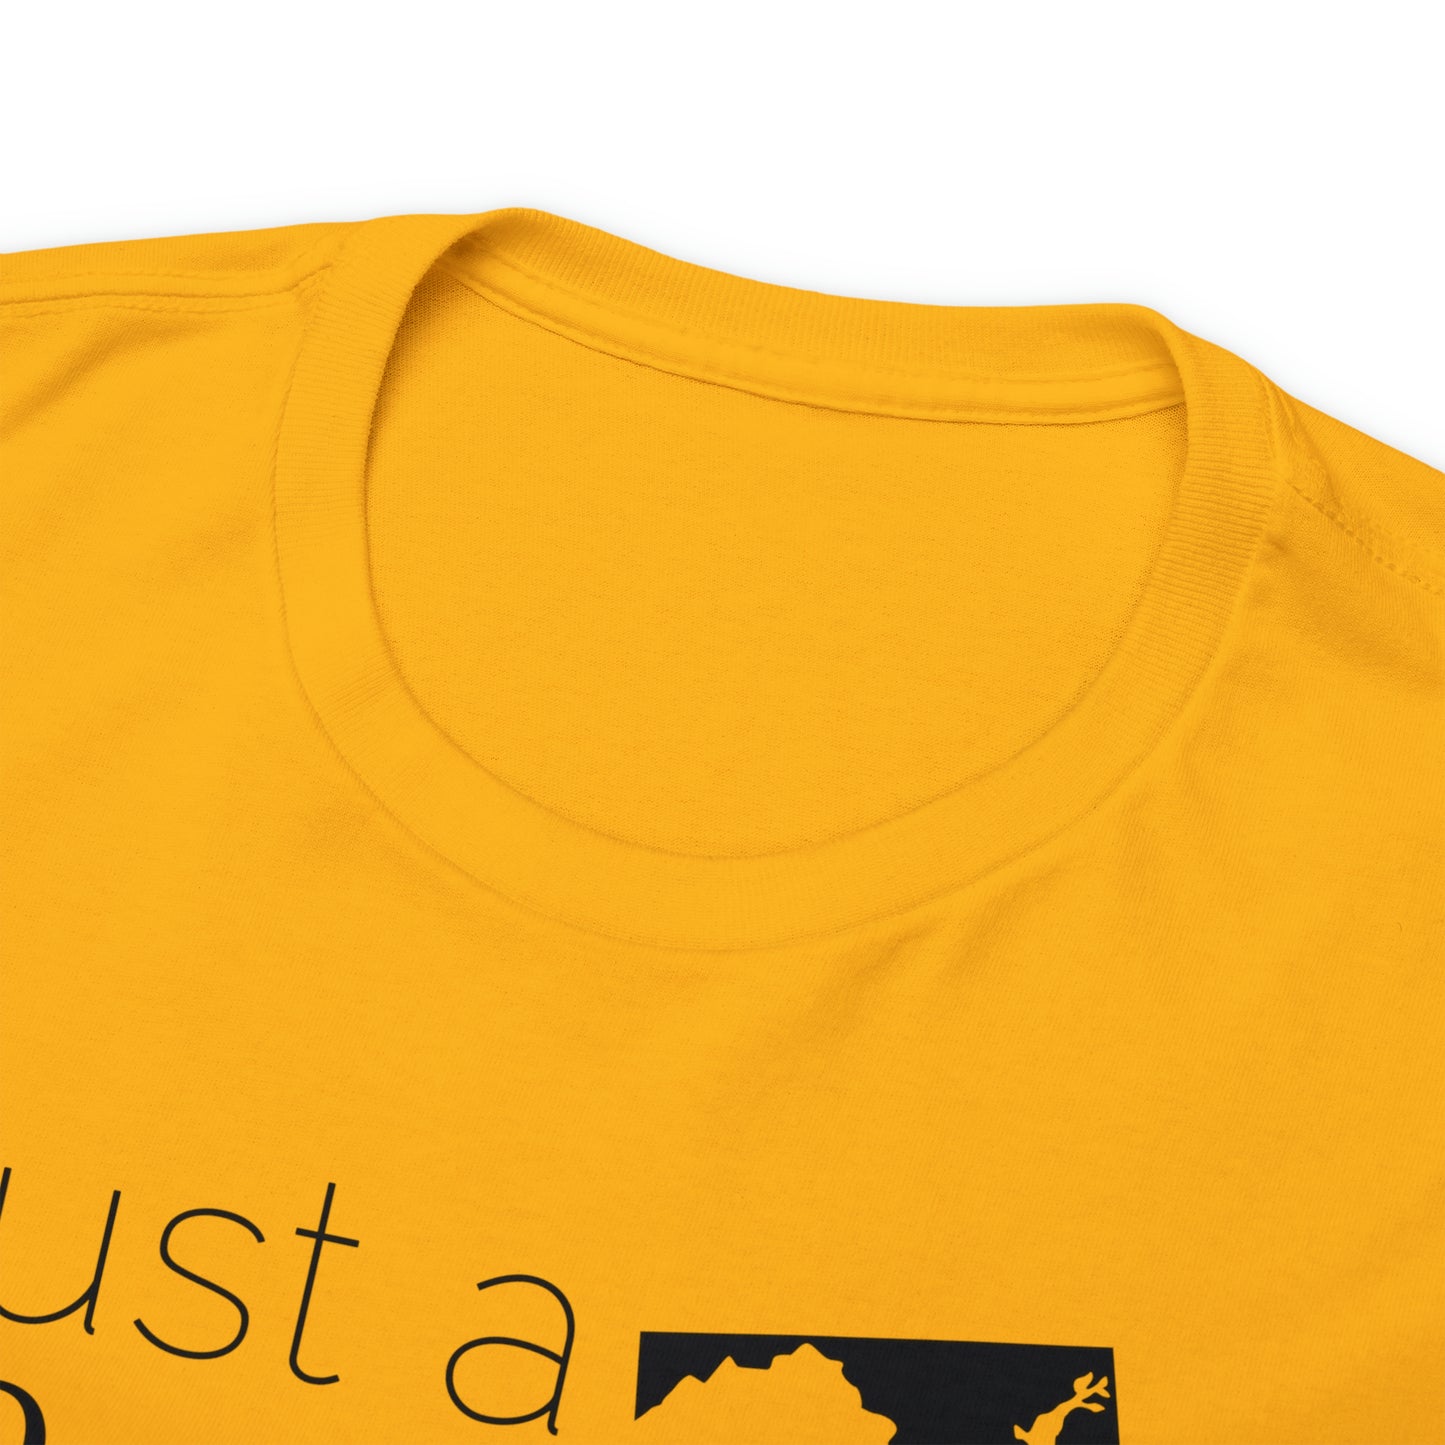 Just a Maryland Girl in a California World Unisex Heavy Cotton Tee